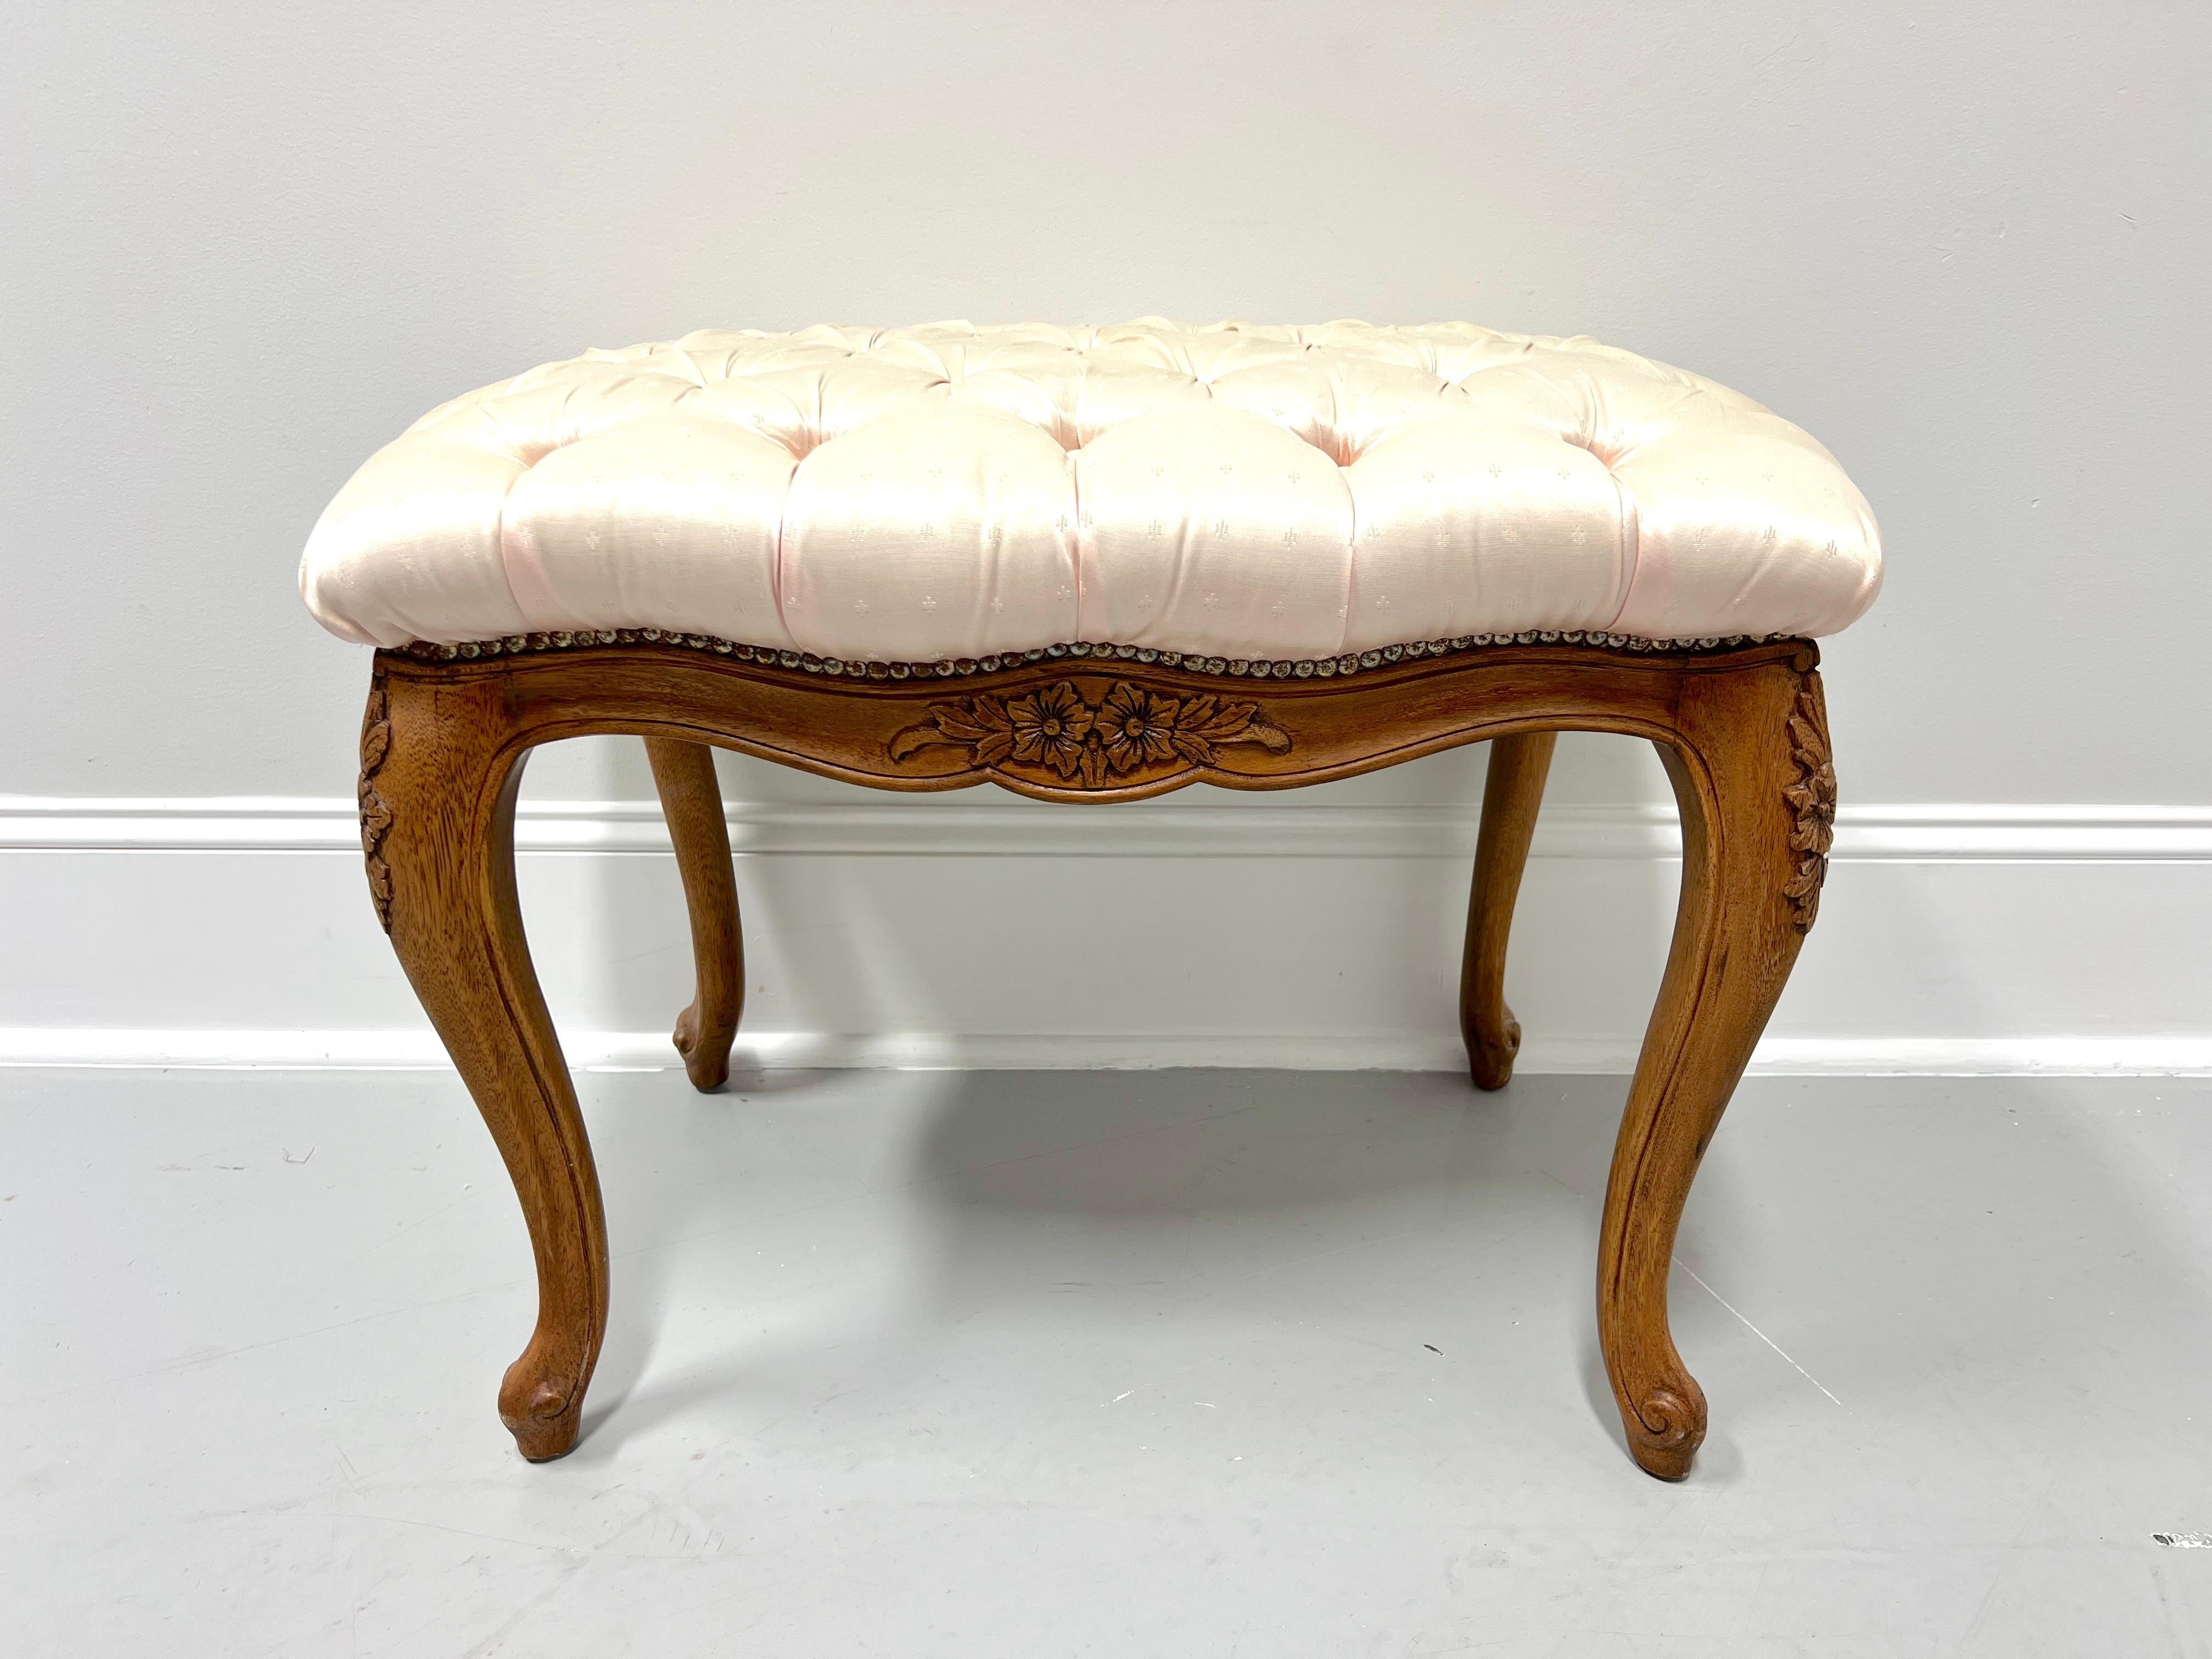 American Antique 19th Century Carved Walnut French Country Vanity Bench with Tufted Silk For Sale